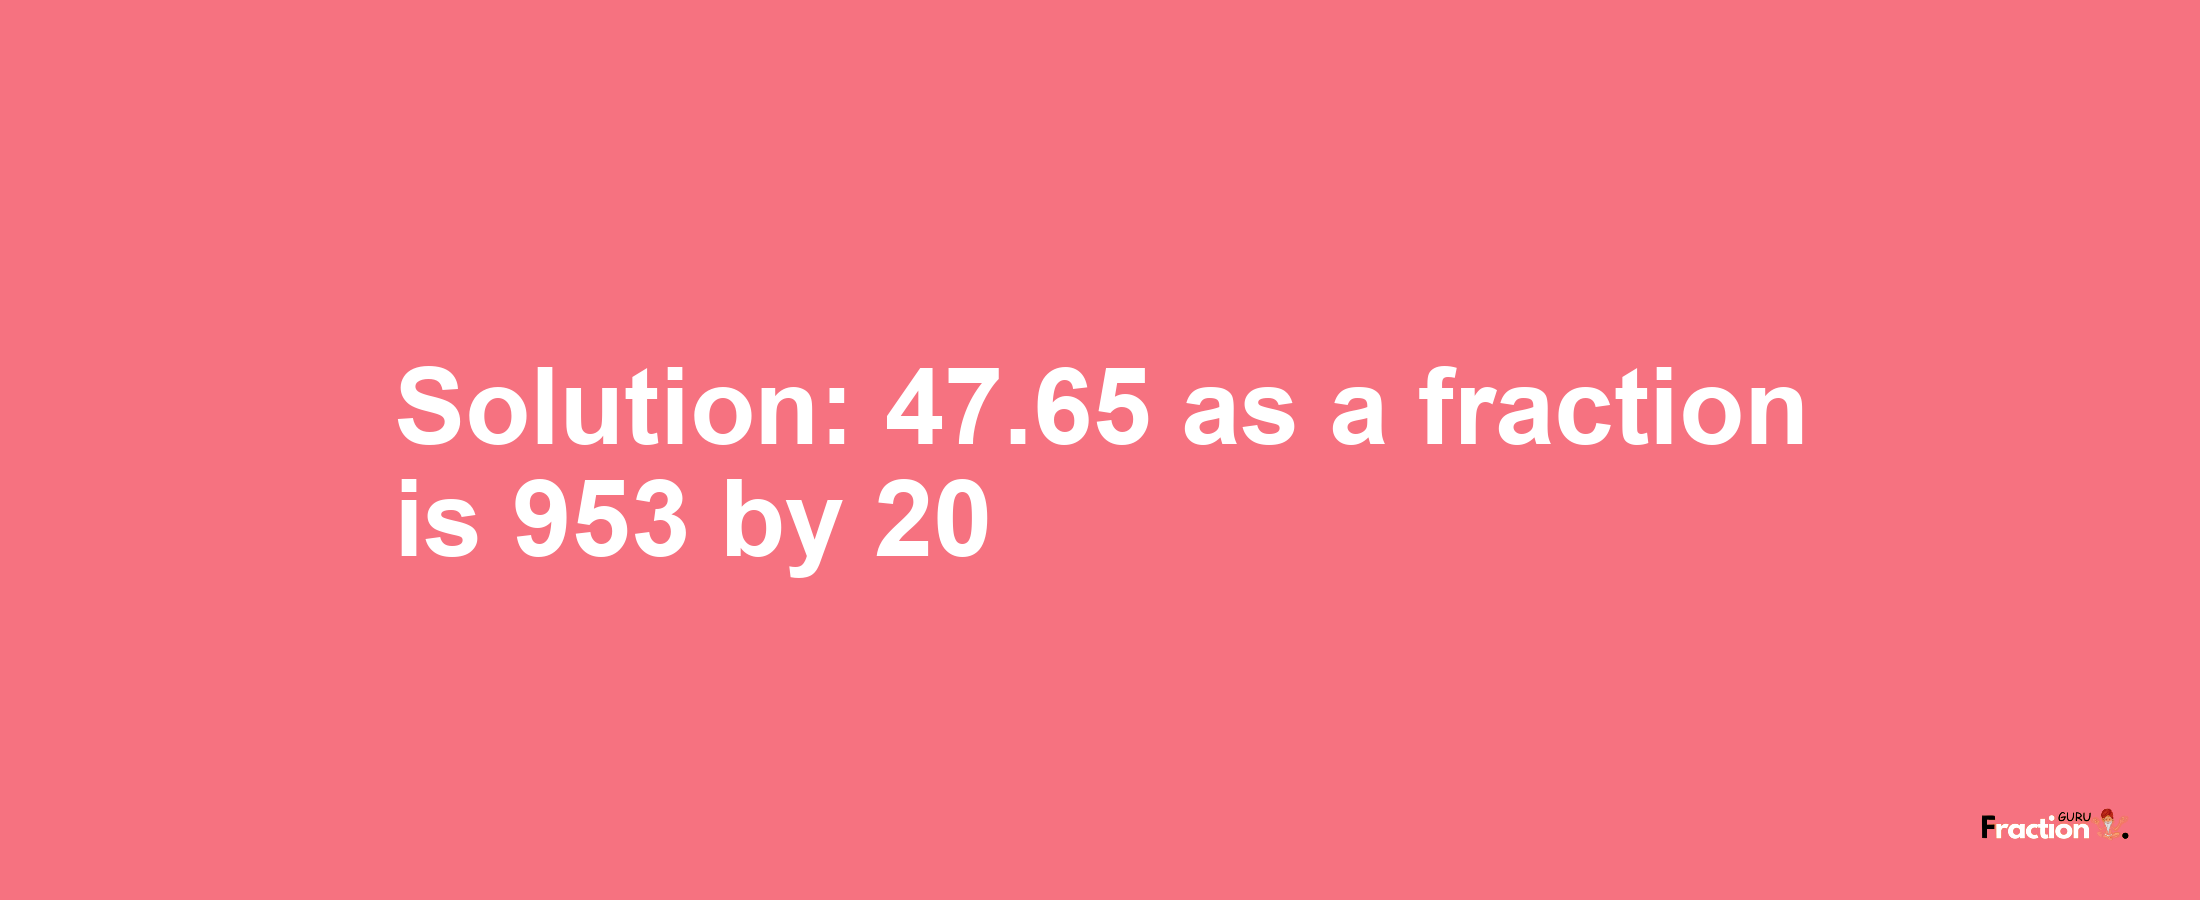 Solution:47.65 as a fraction is 953/20